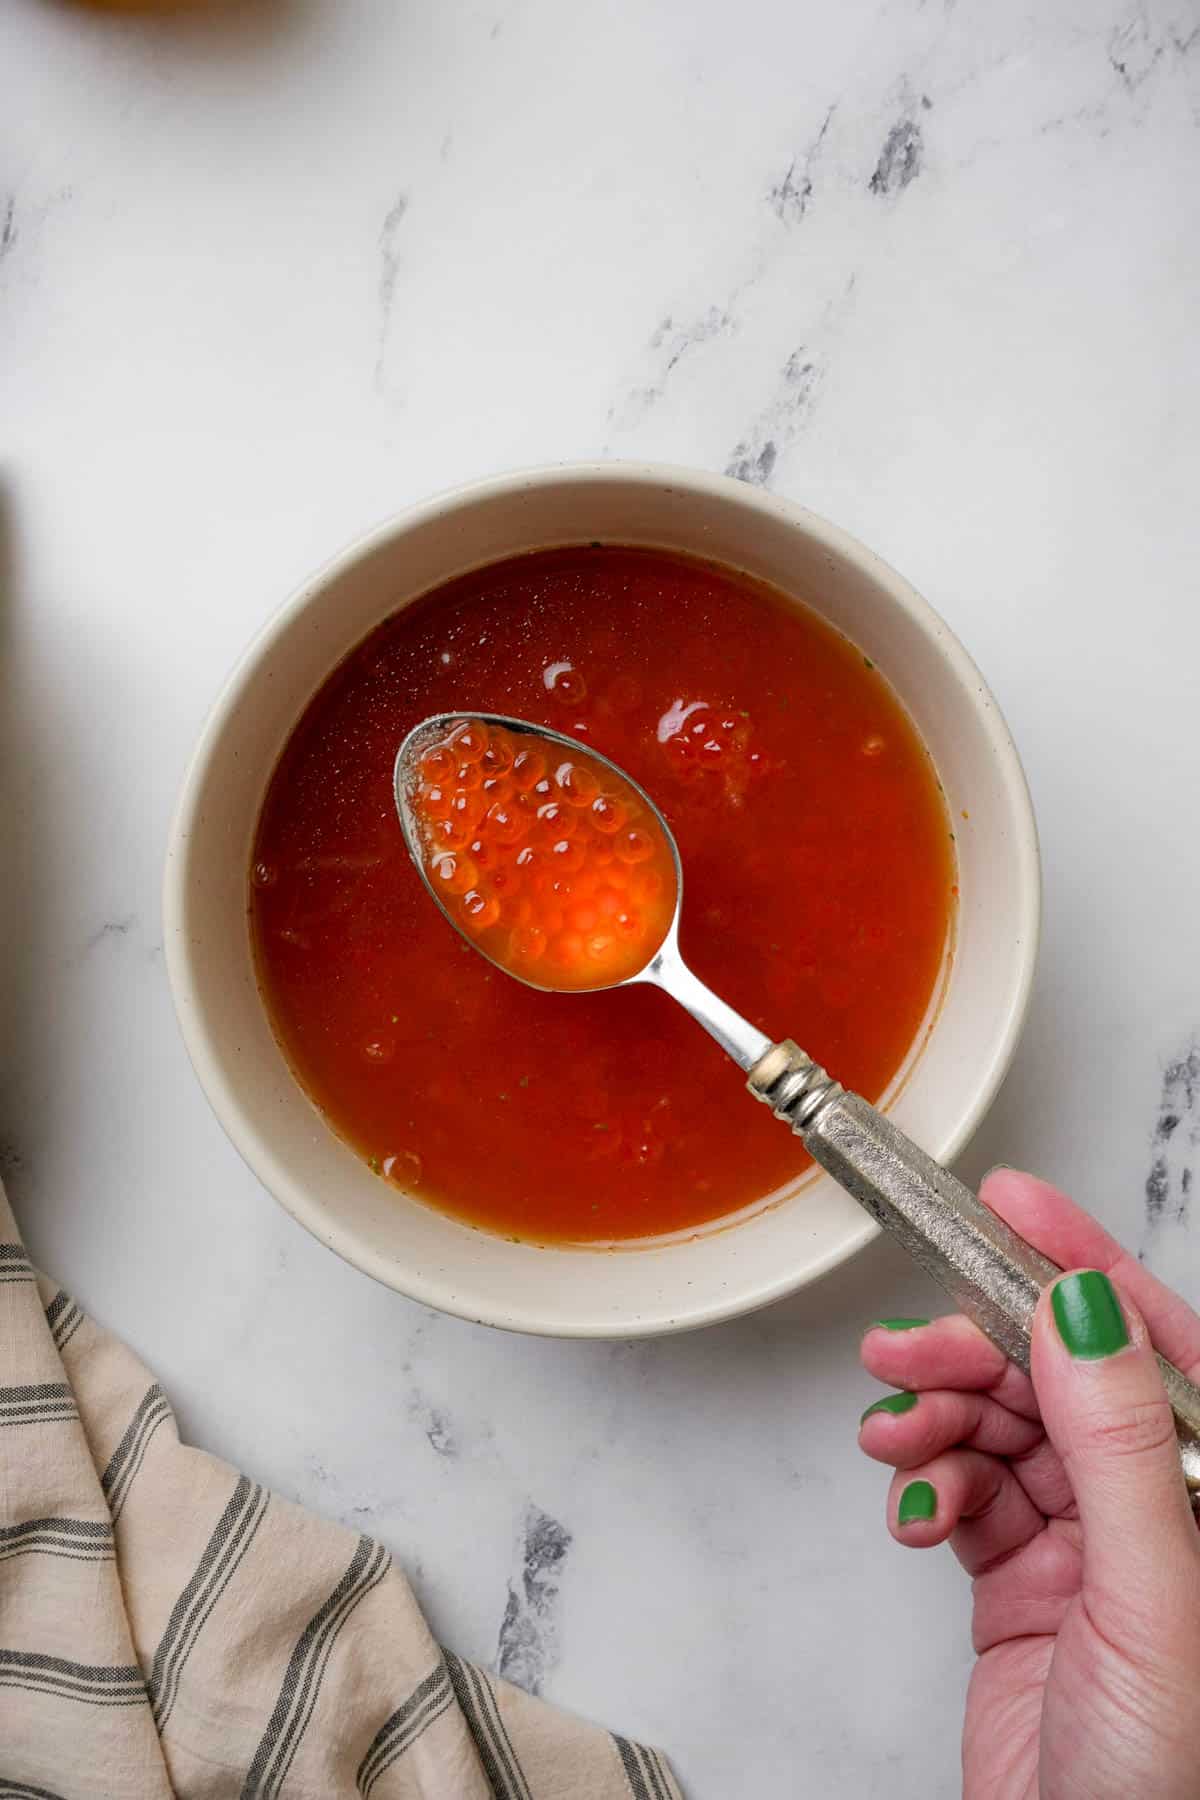 salmon roe being cured in a liquid in a bowl